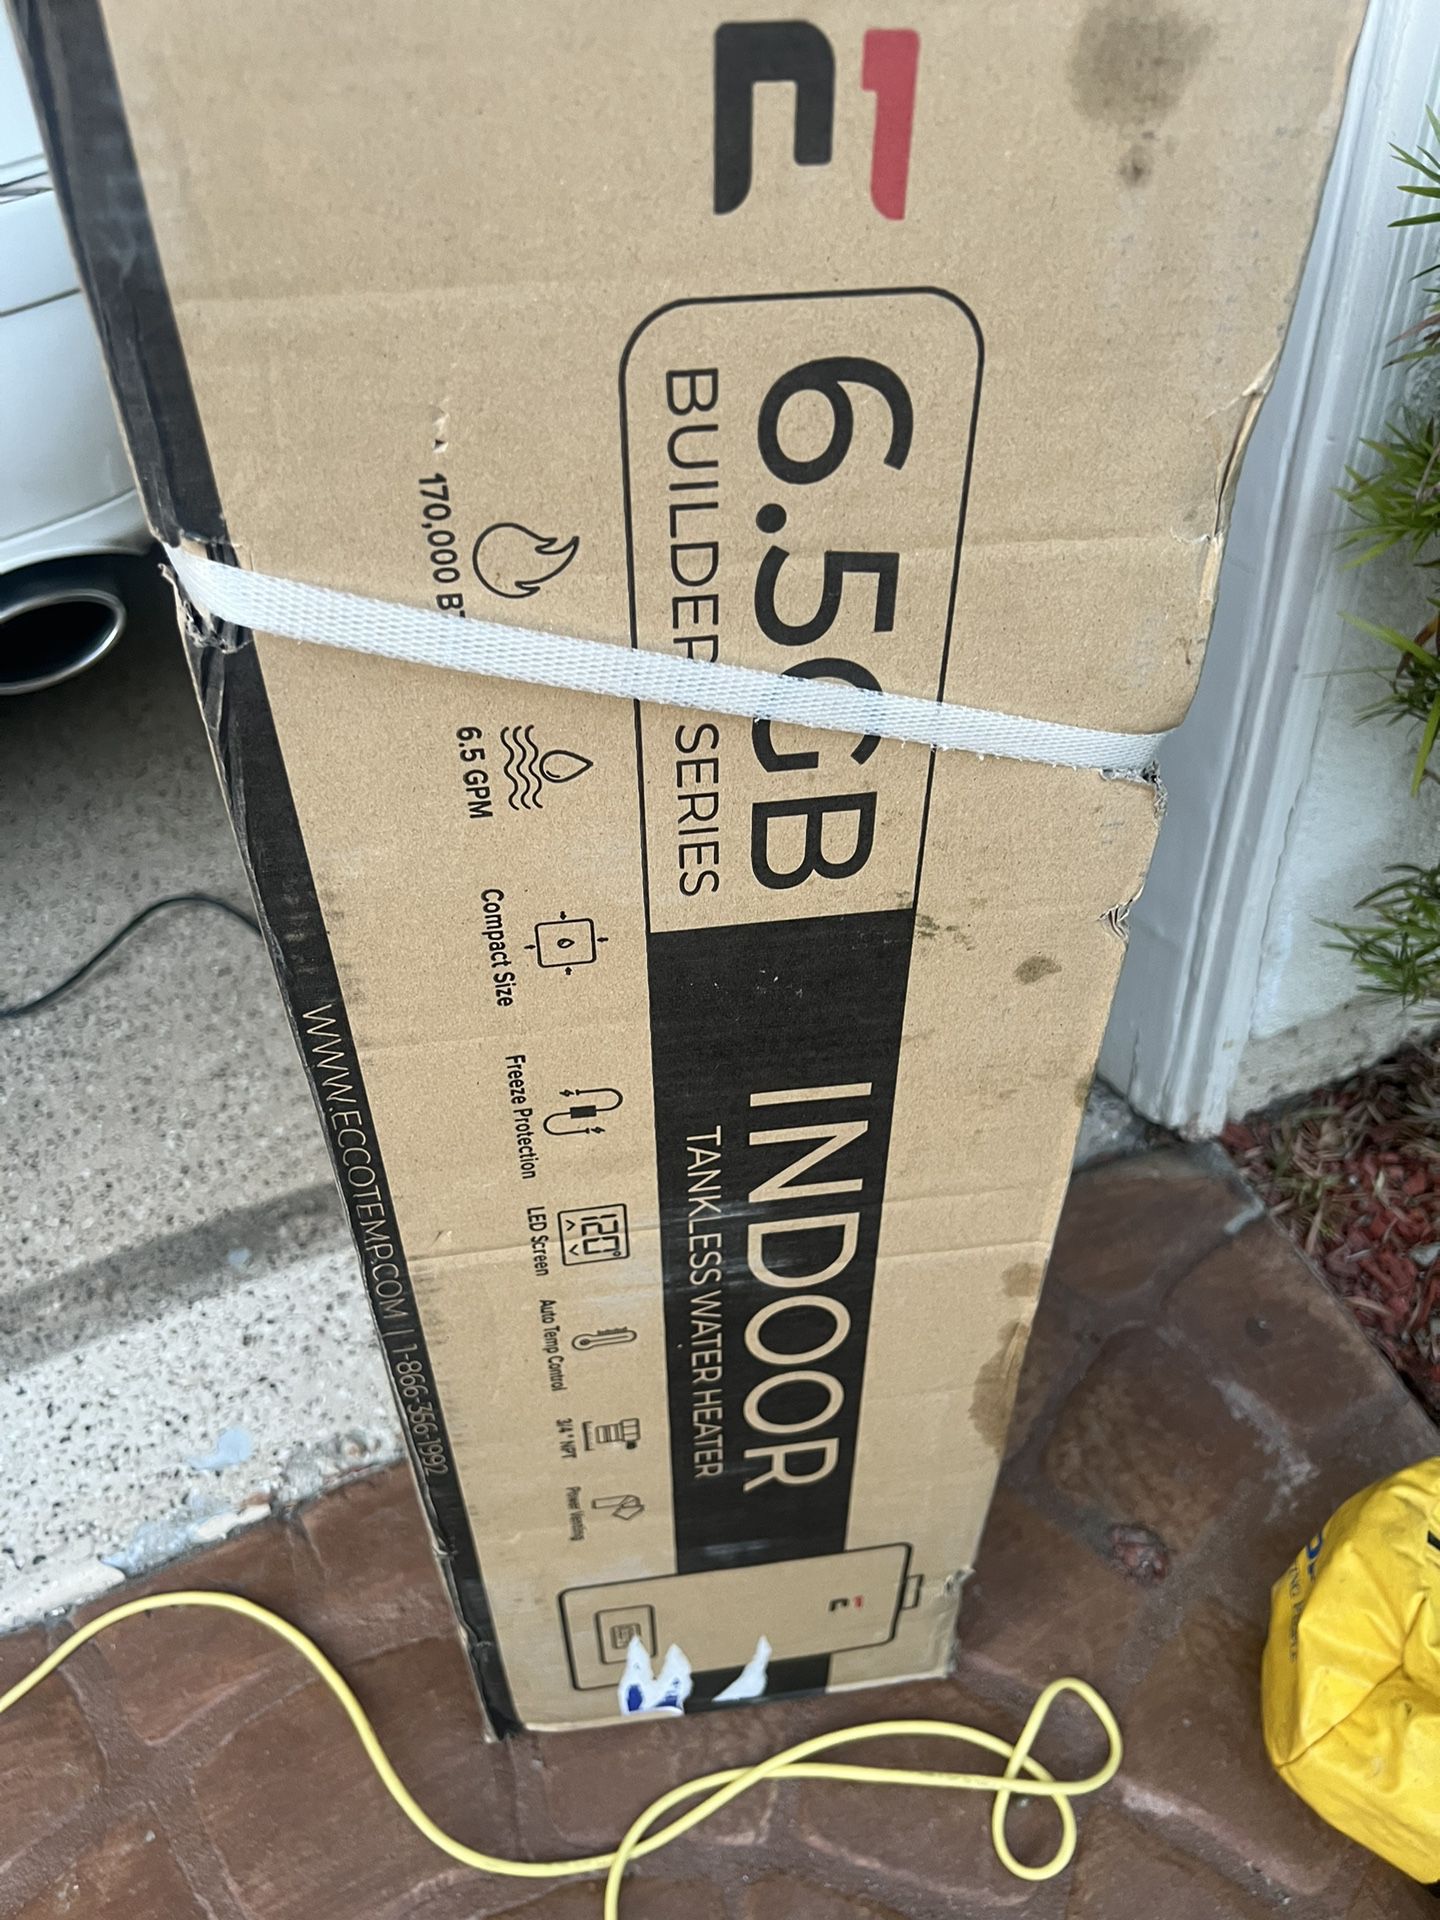 Tankless Water Heater- Brand New In the box Unopened 